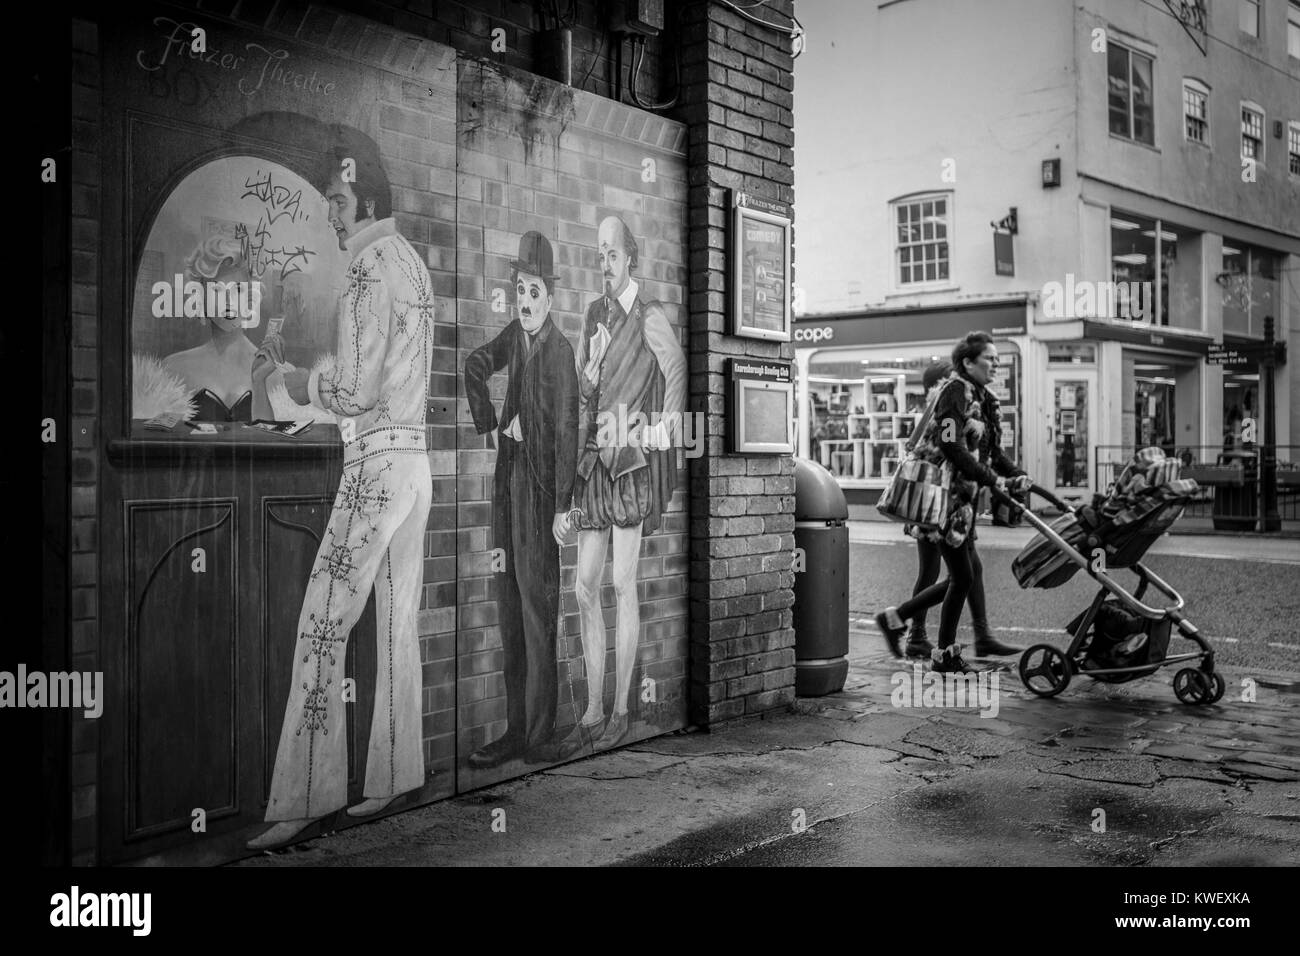 Wall mural of Elvis, Charlie Chaplin, William Shakespeare buying theatre tickets from Marilyn Monroe as woman walks past pushing a pram. Street photo. Stock Photo